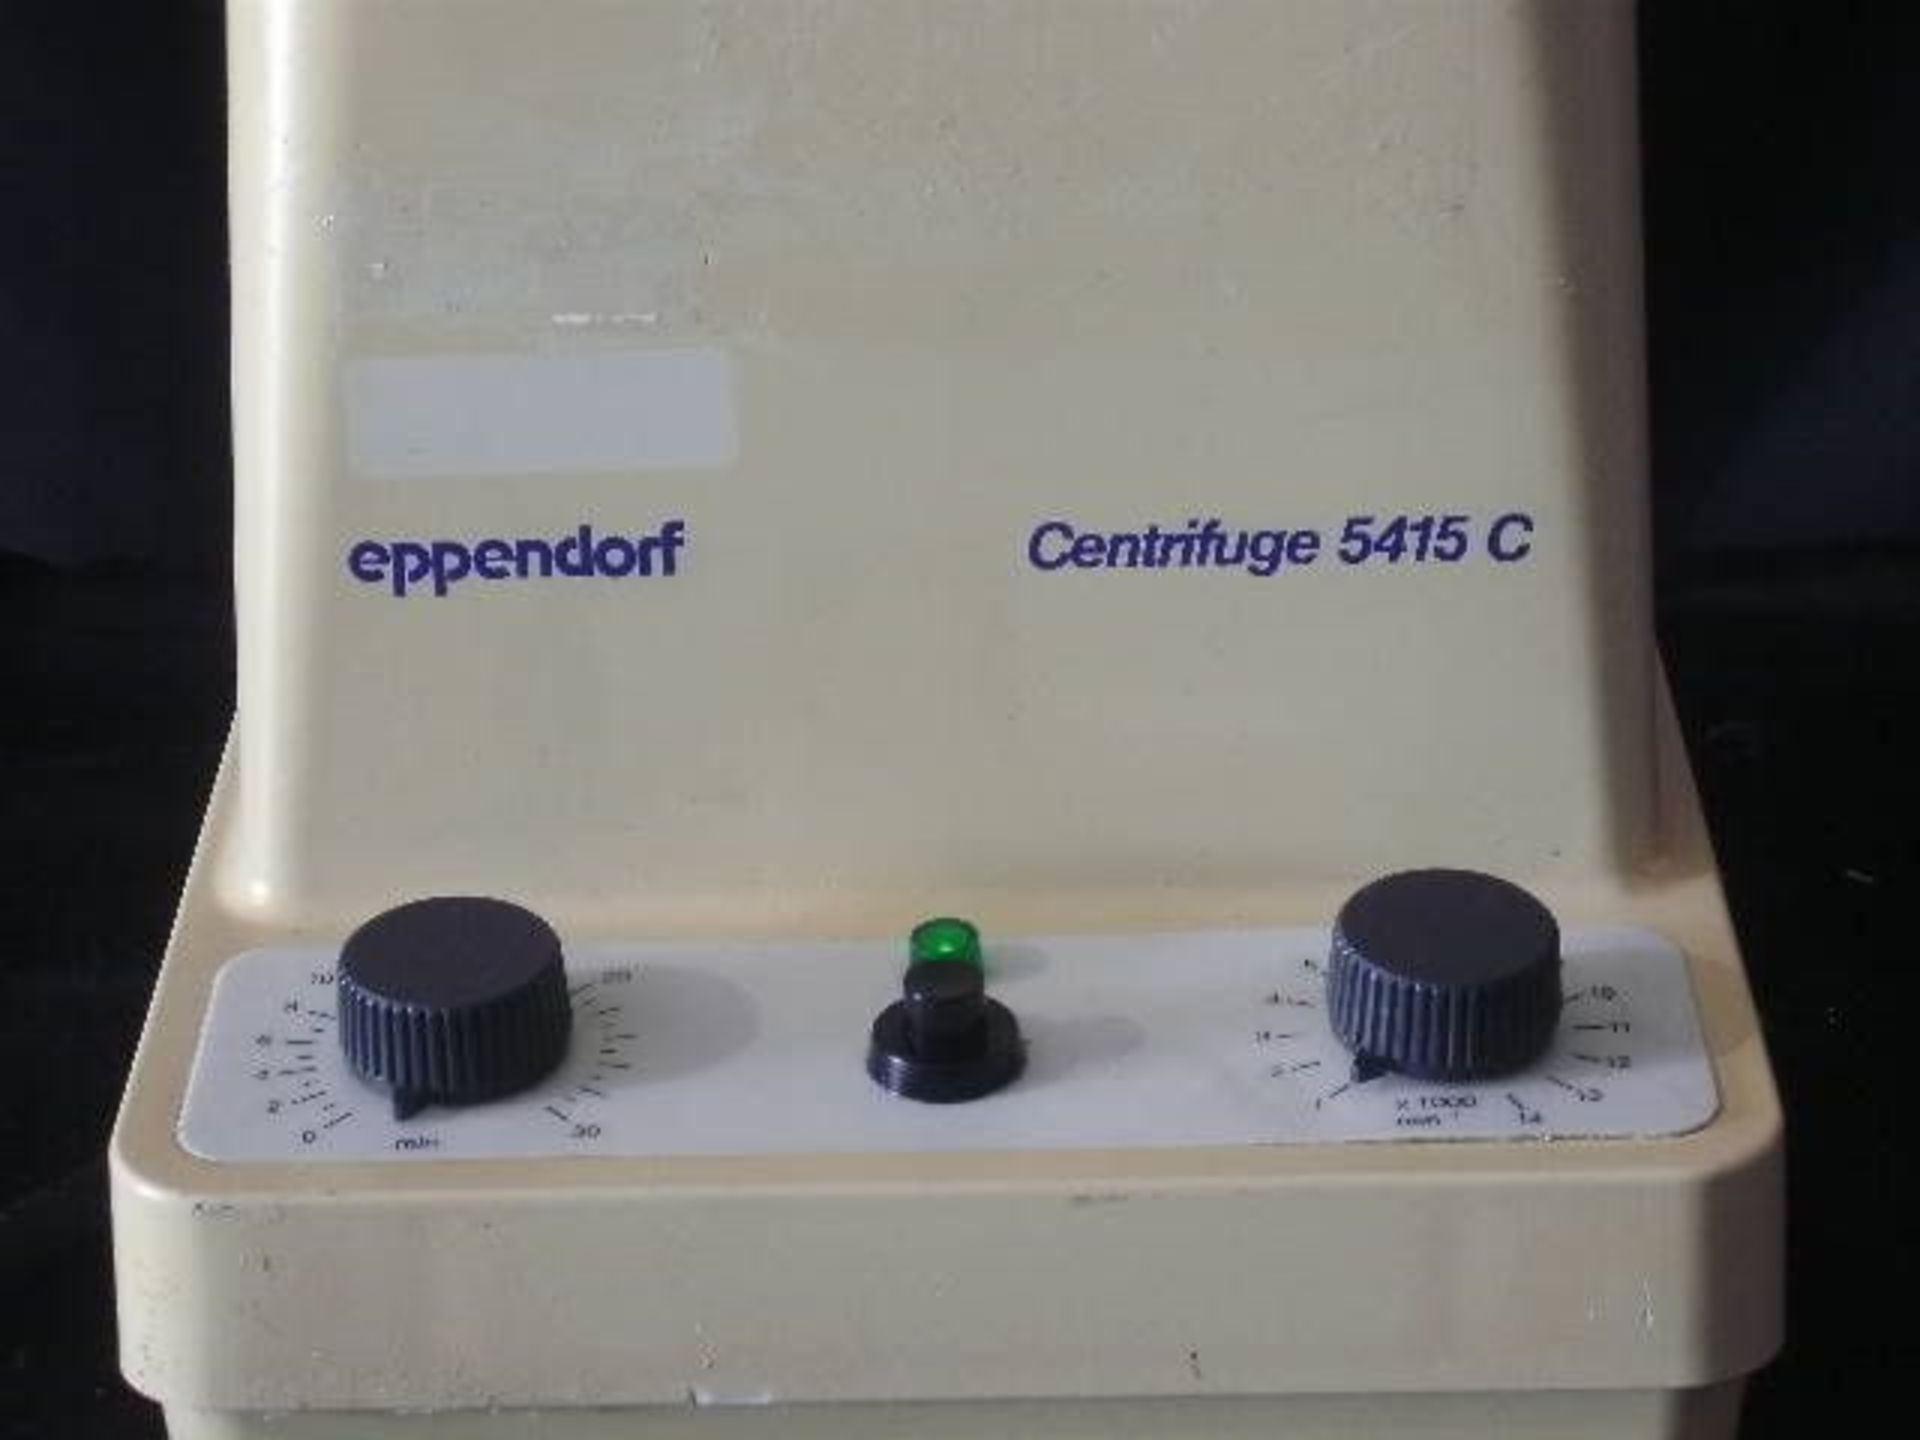 Eppendorf Centrifuge 5415C 5415 C with 18 Place Rotor 14,000 RPM, Qty 2, 320831805483 - Image 2 of 4